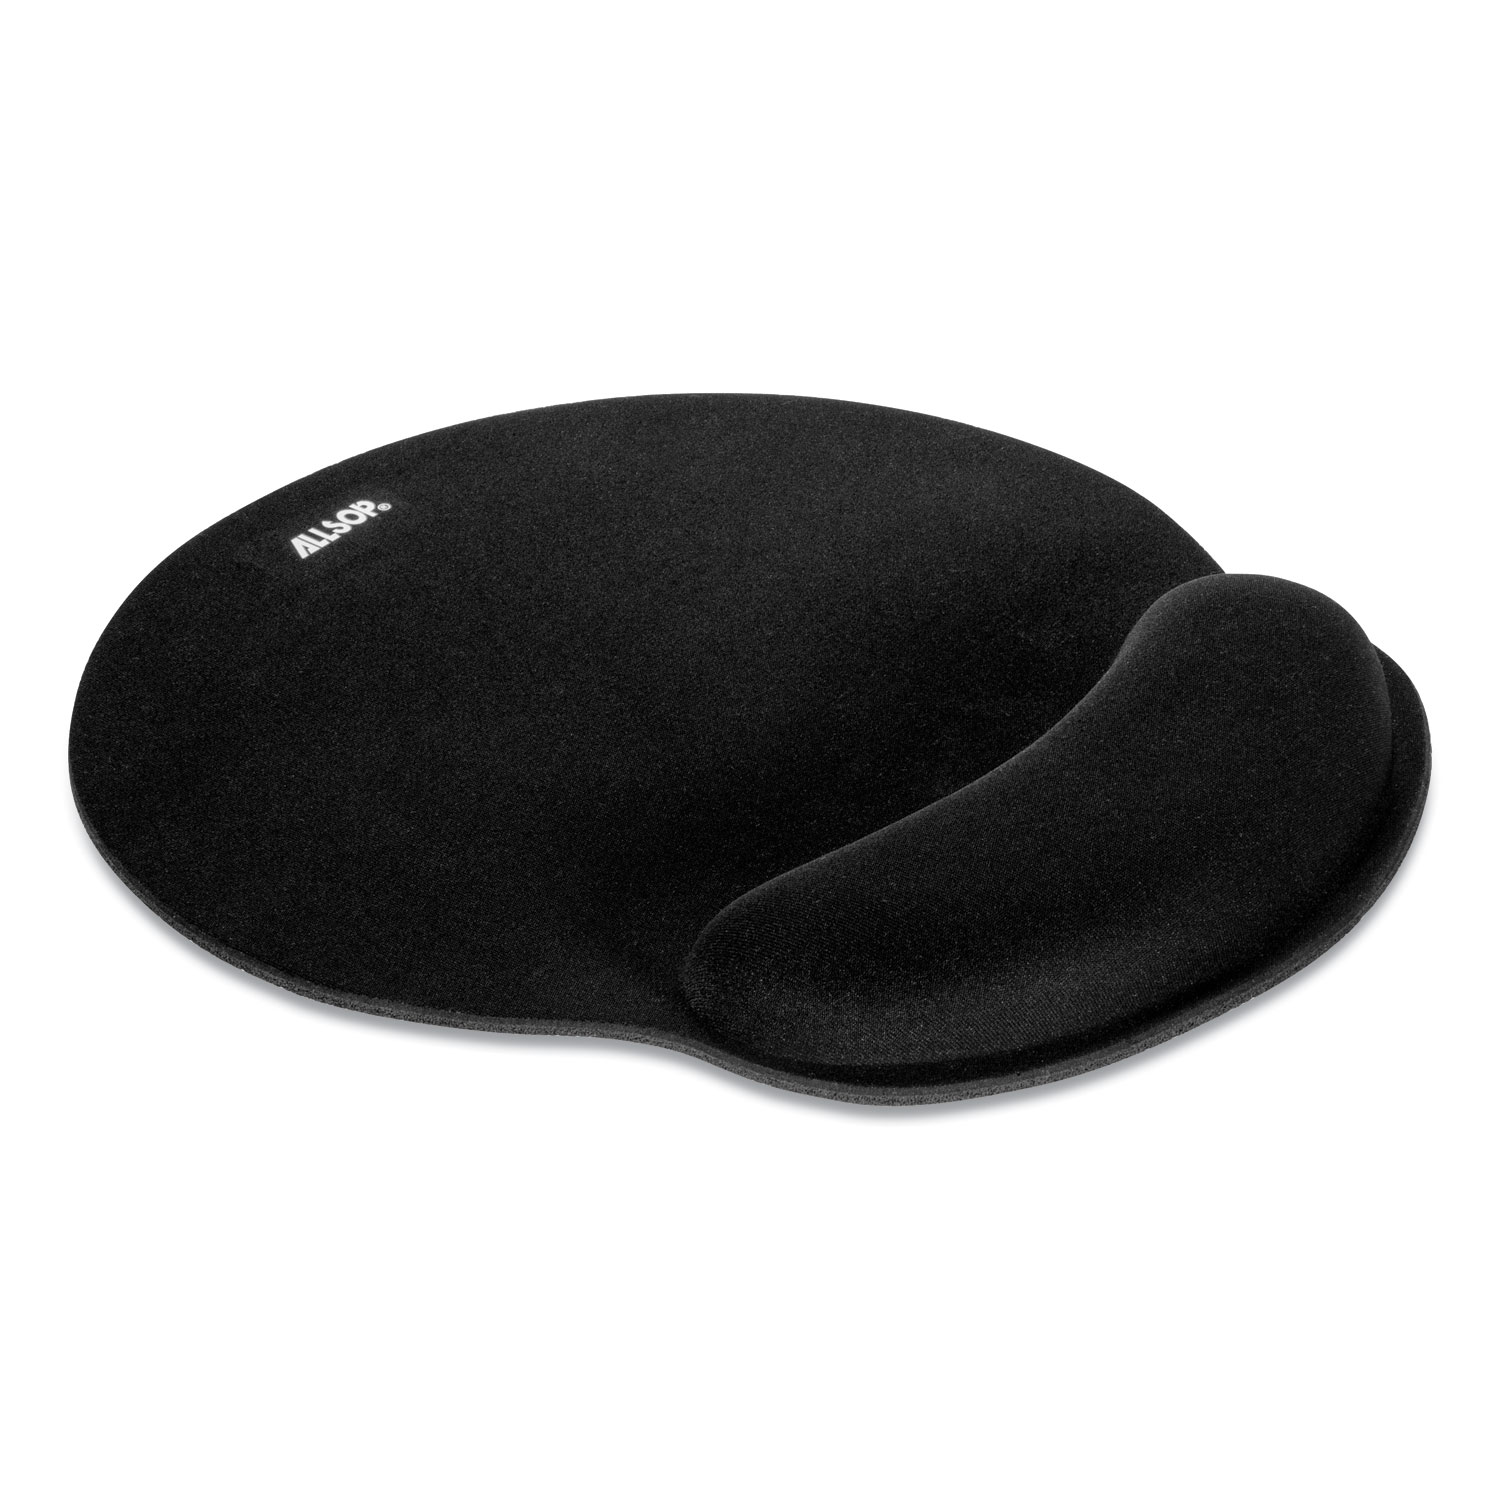 MousePad Pro Memory Foam Mouse Pad with Wrist Rest, 9 x 10, Black - ASE  Direct